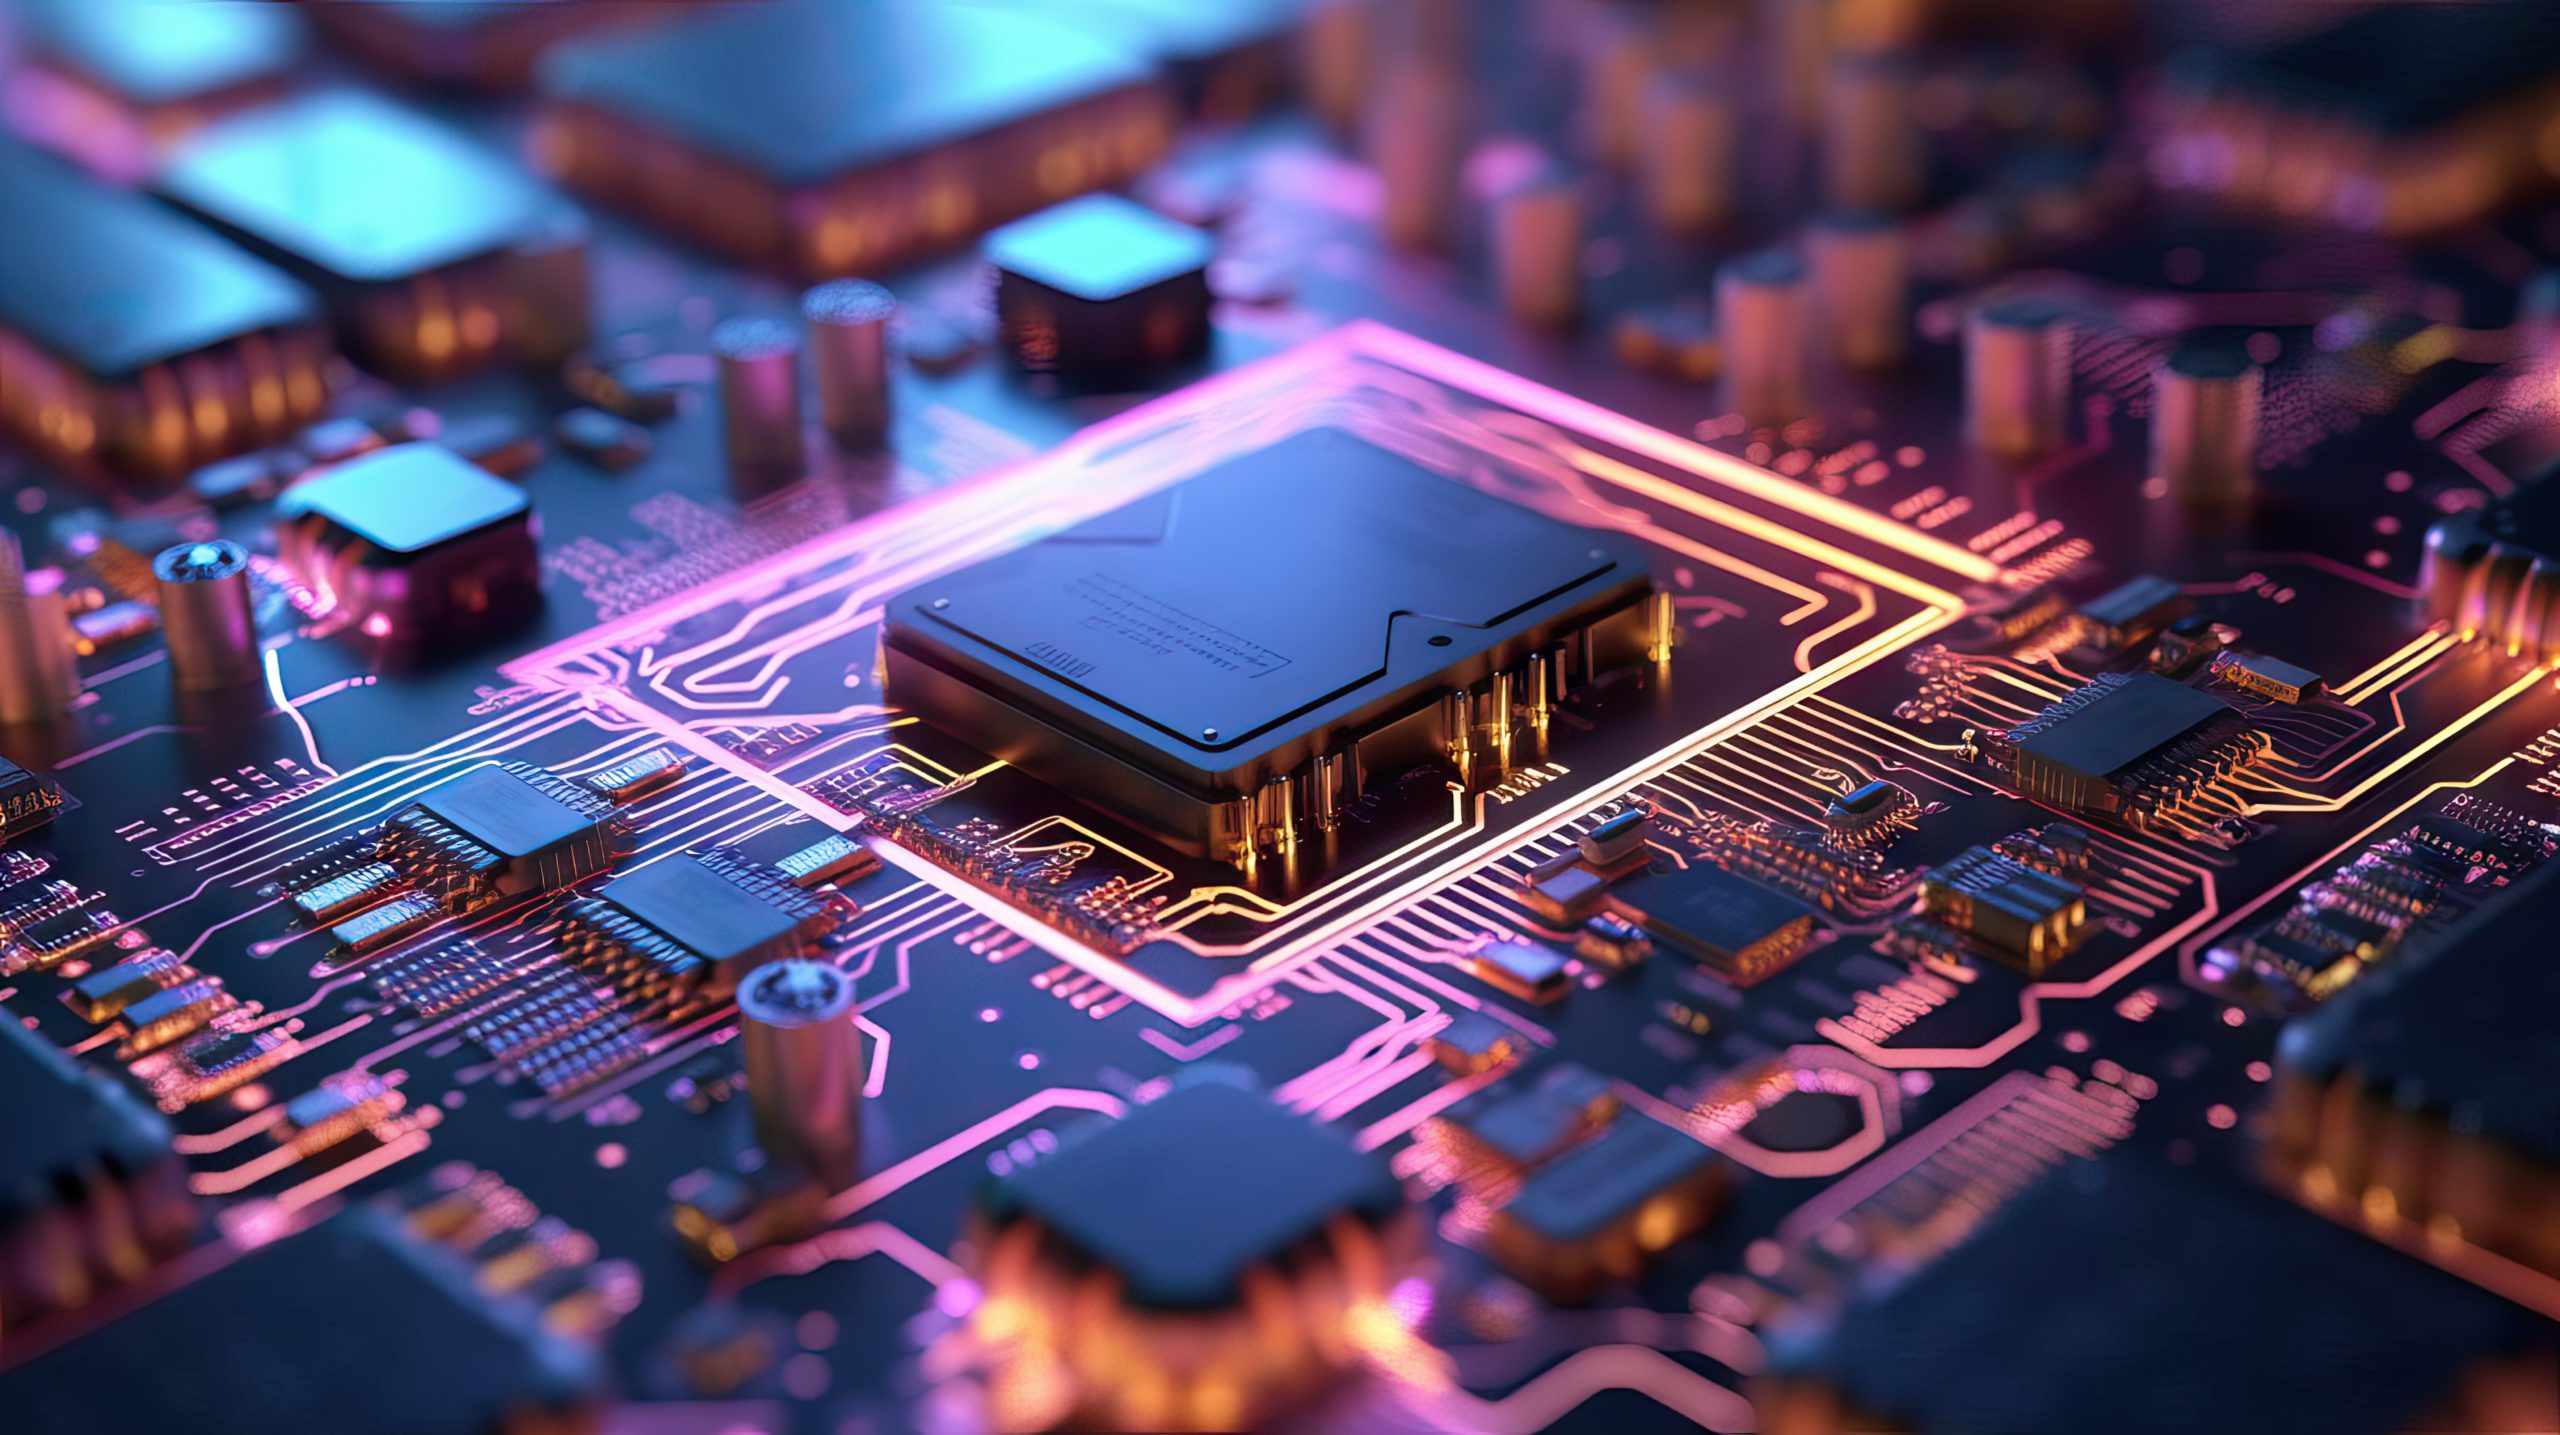 SEMIconductors Manufacture Scaleup CR&D £12m Competition - Launch and Briefing